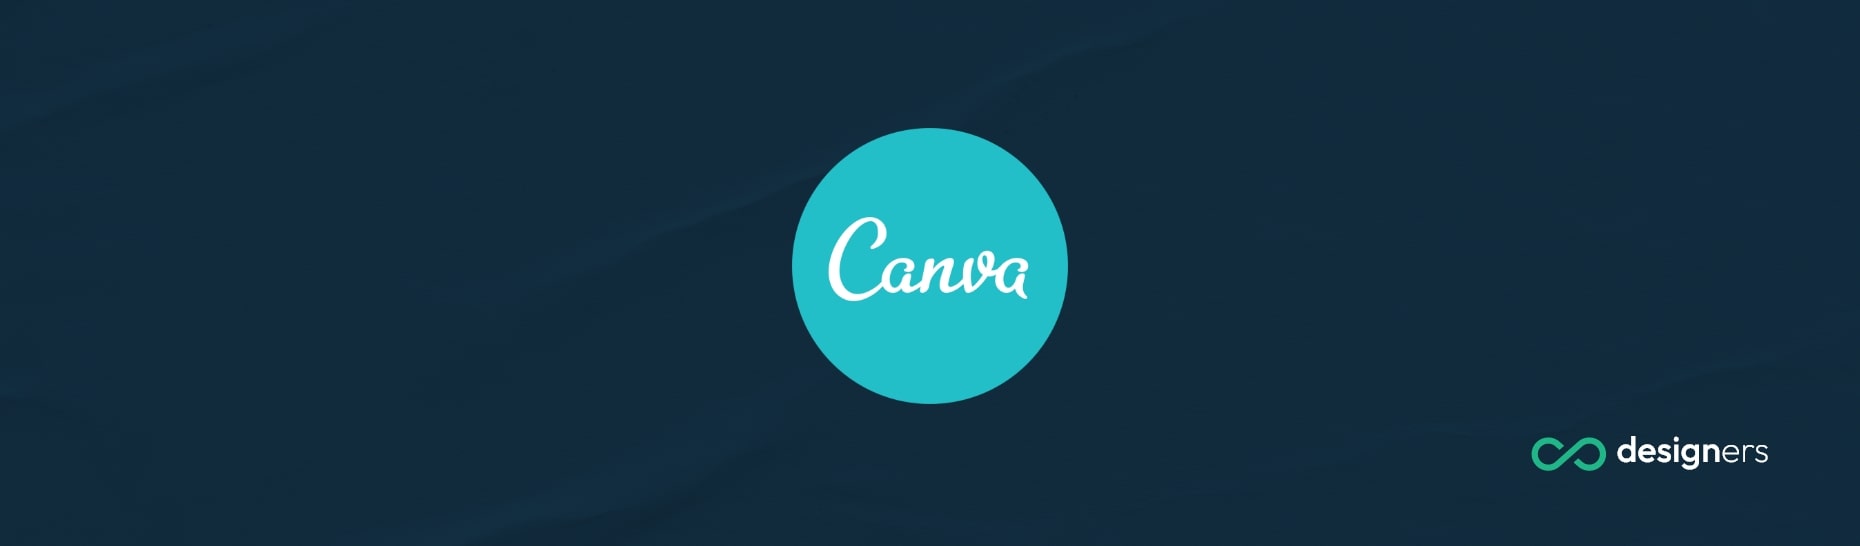 Is Canva the Same as InDesign?